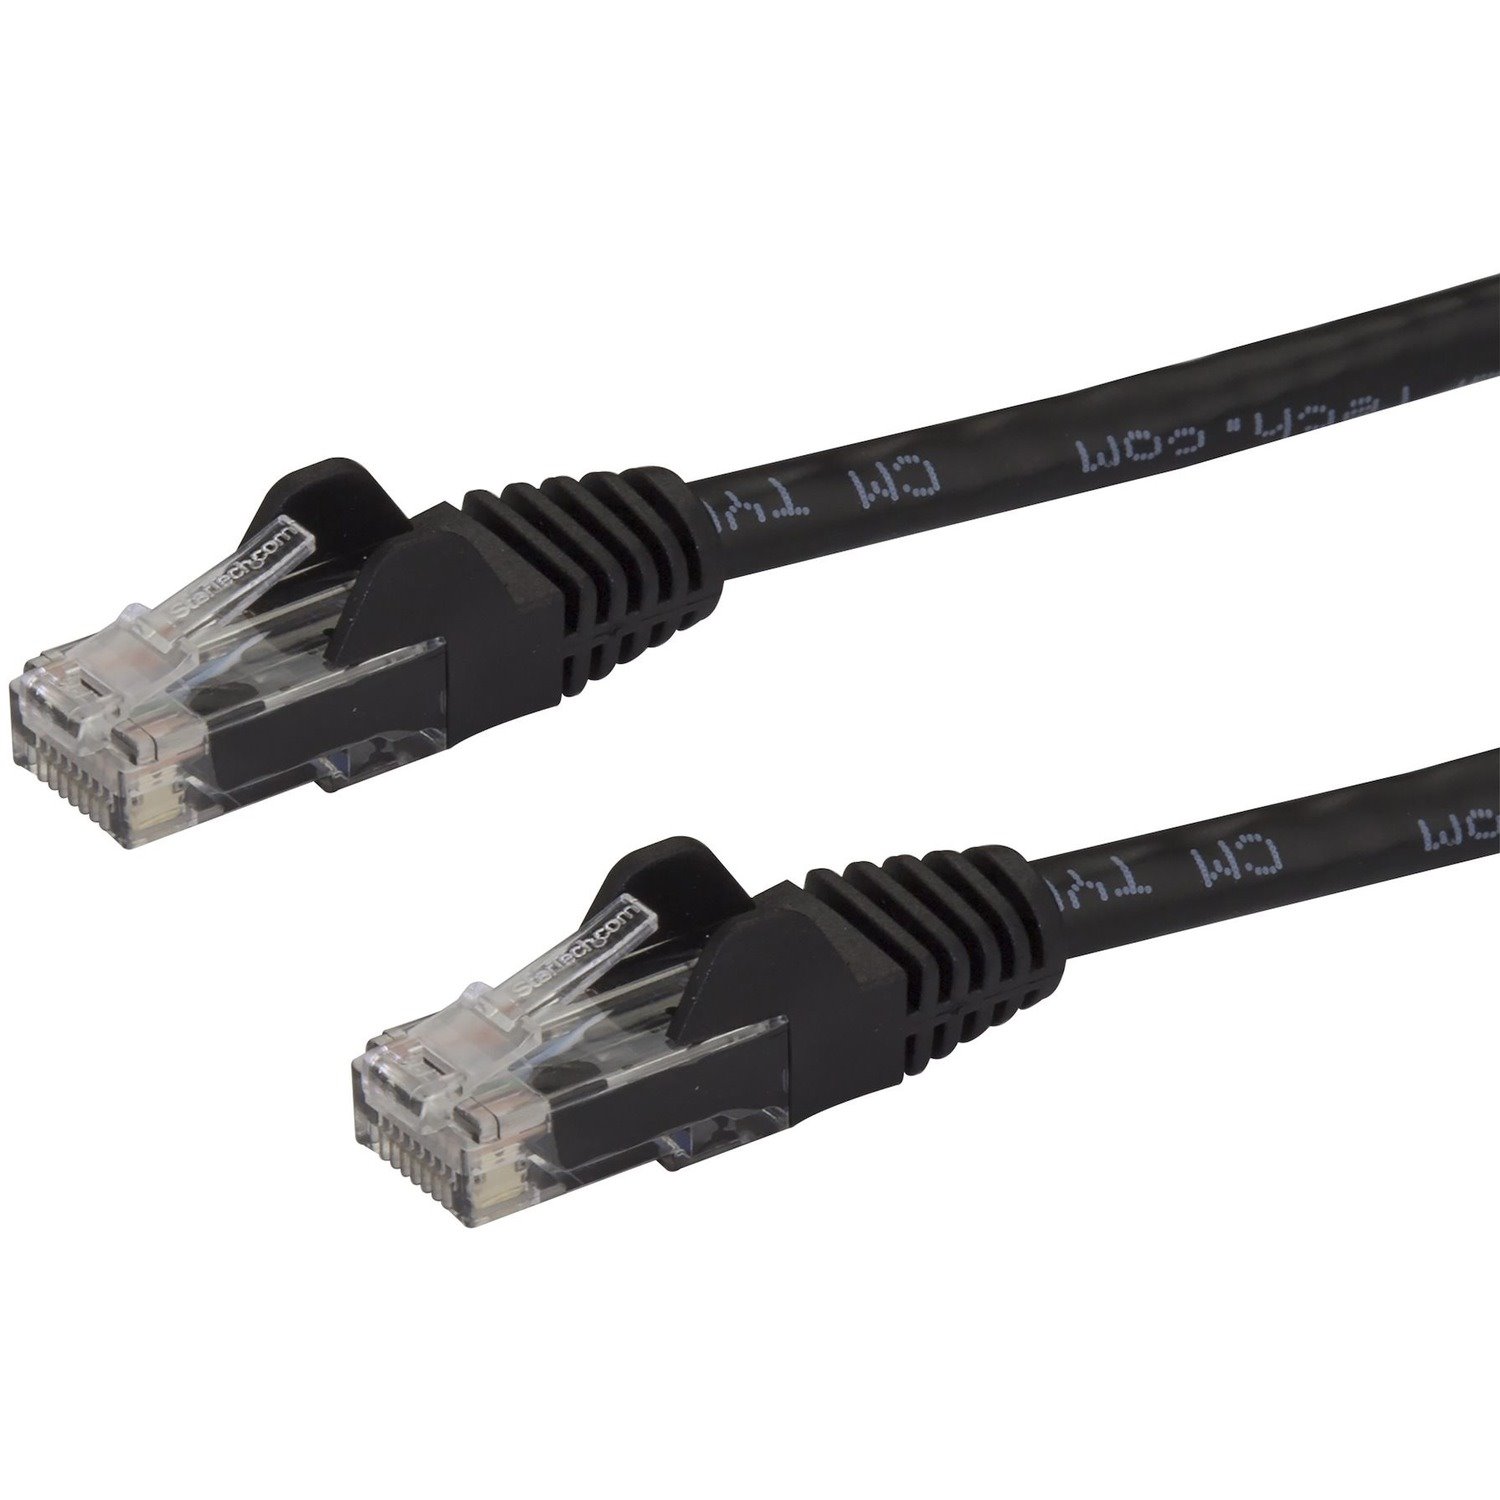 StarTech.com 1m CAT6 Ethernet Cable - Black Snagless Gigabit - 100W PoE UTP 650MHz Category 6 Patch Cord UL Certified Wiring/TIA